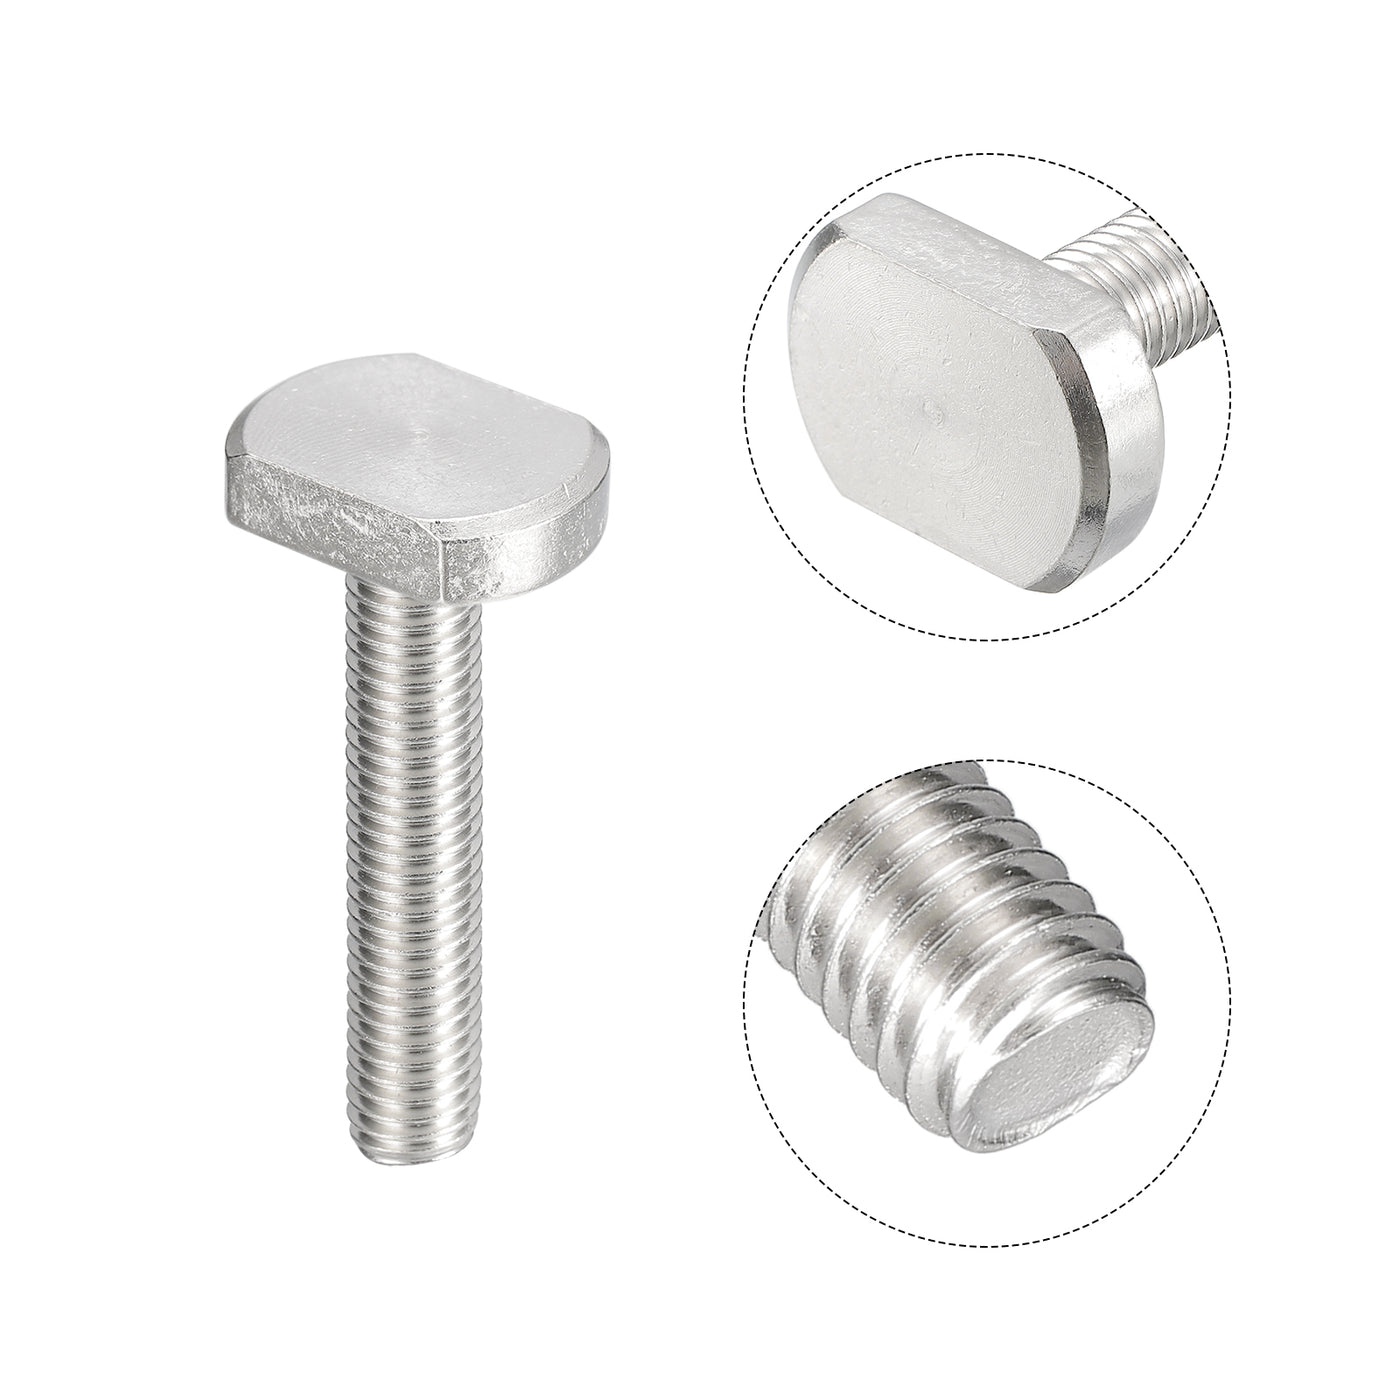 uxcell Uxcell T-Slot Bolts, 5pcs M10x50mm Drop-in Stud Sliding Bolts 304 Stainless Steel